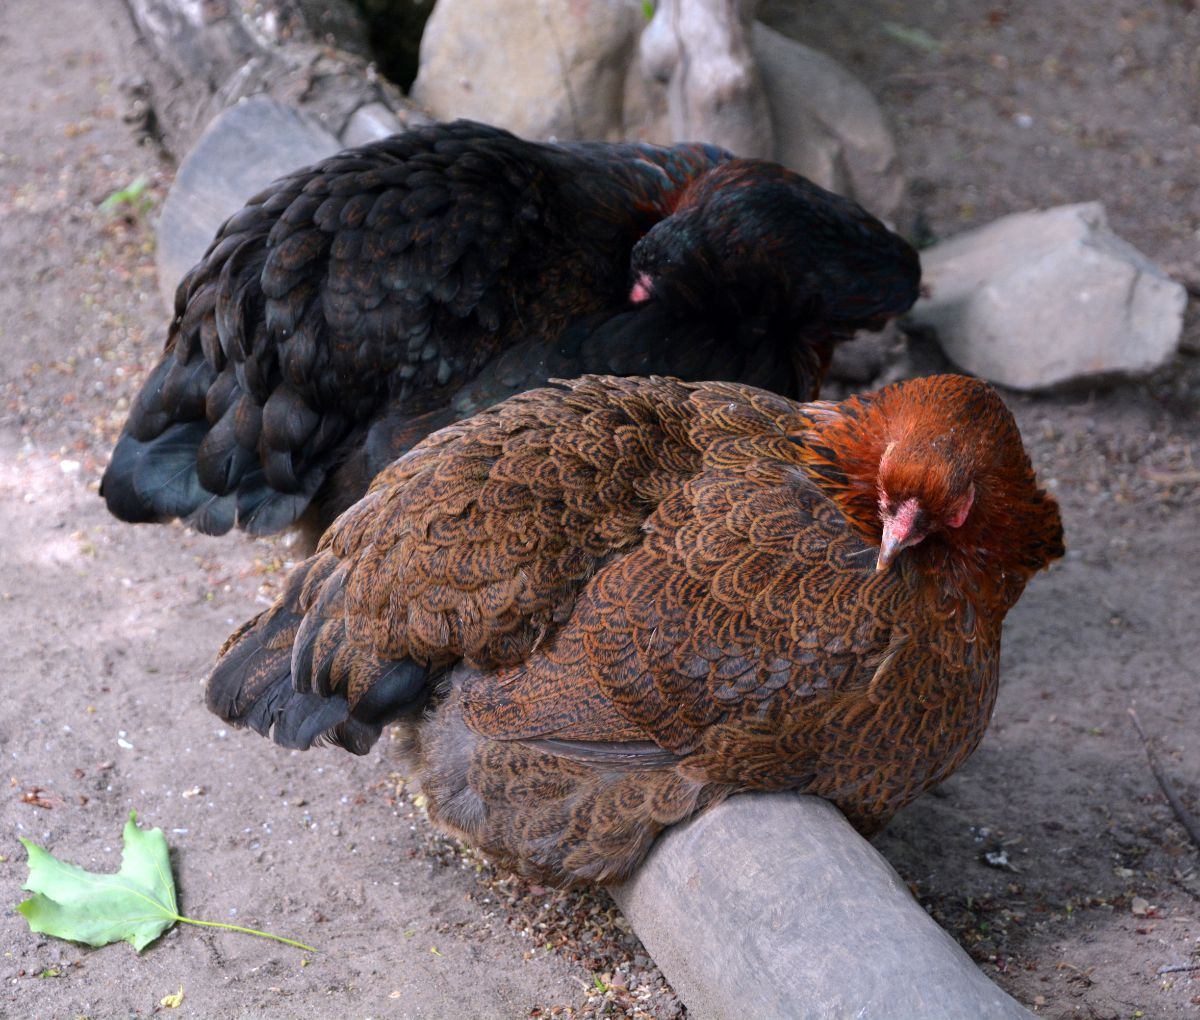 Black and black cornish chickens sitting on a wooden log.